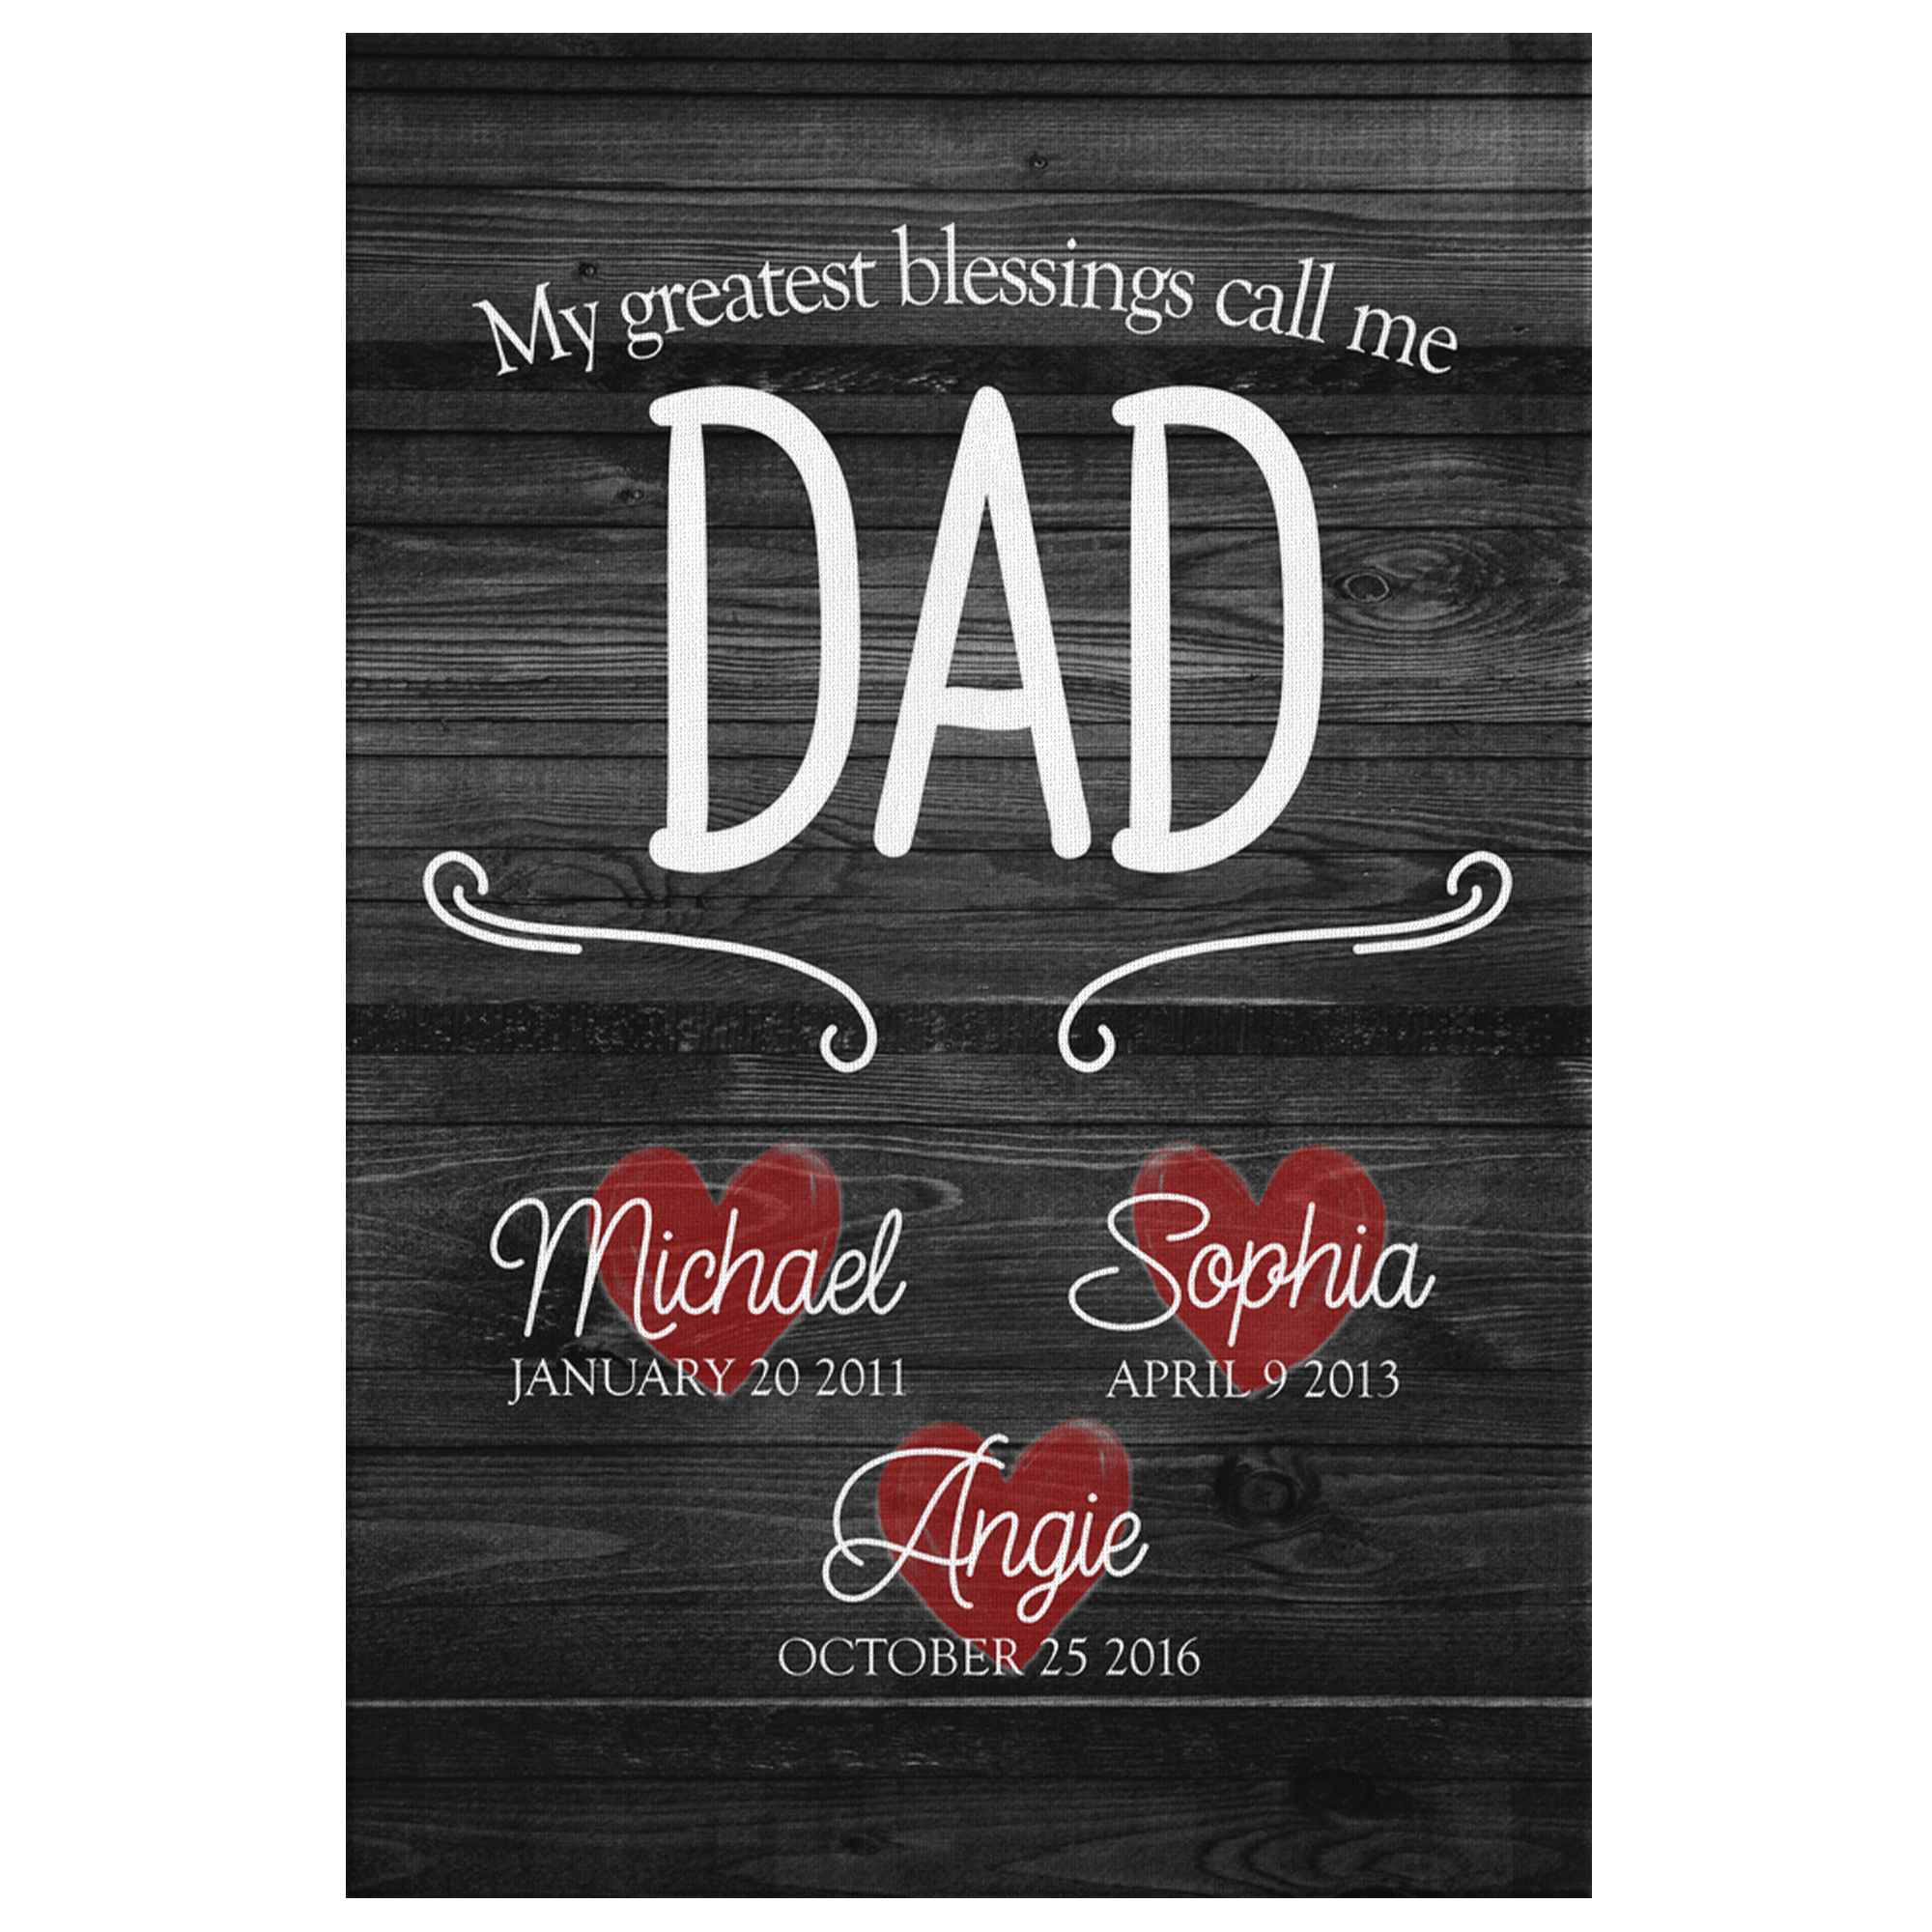 Personalized "My Greatest Blessings Call Me Dad" Premium Canvas Wall Art